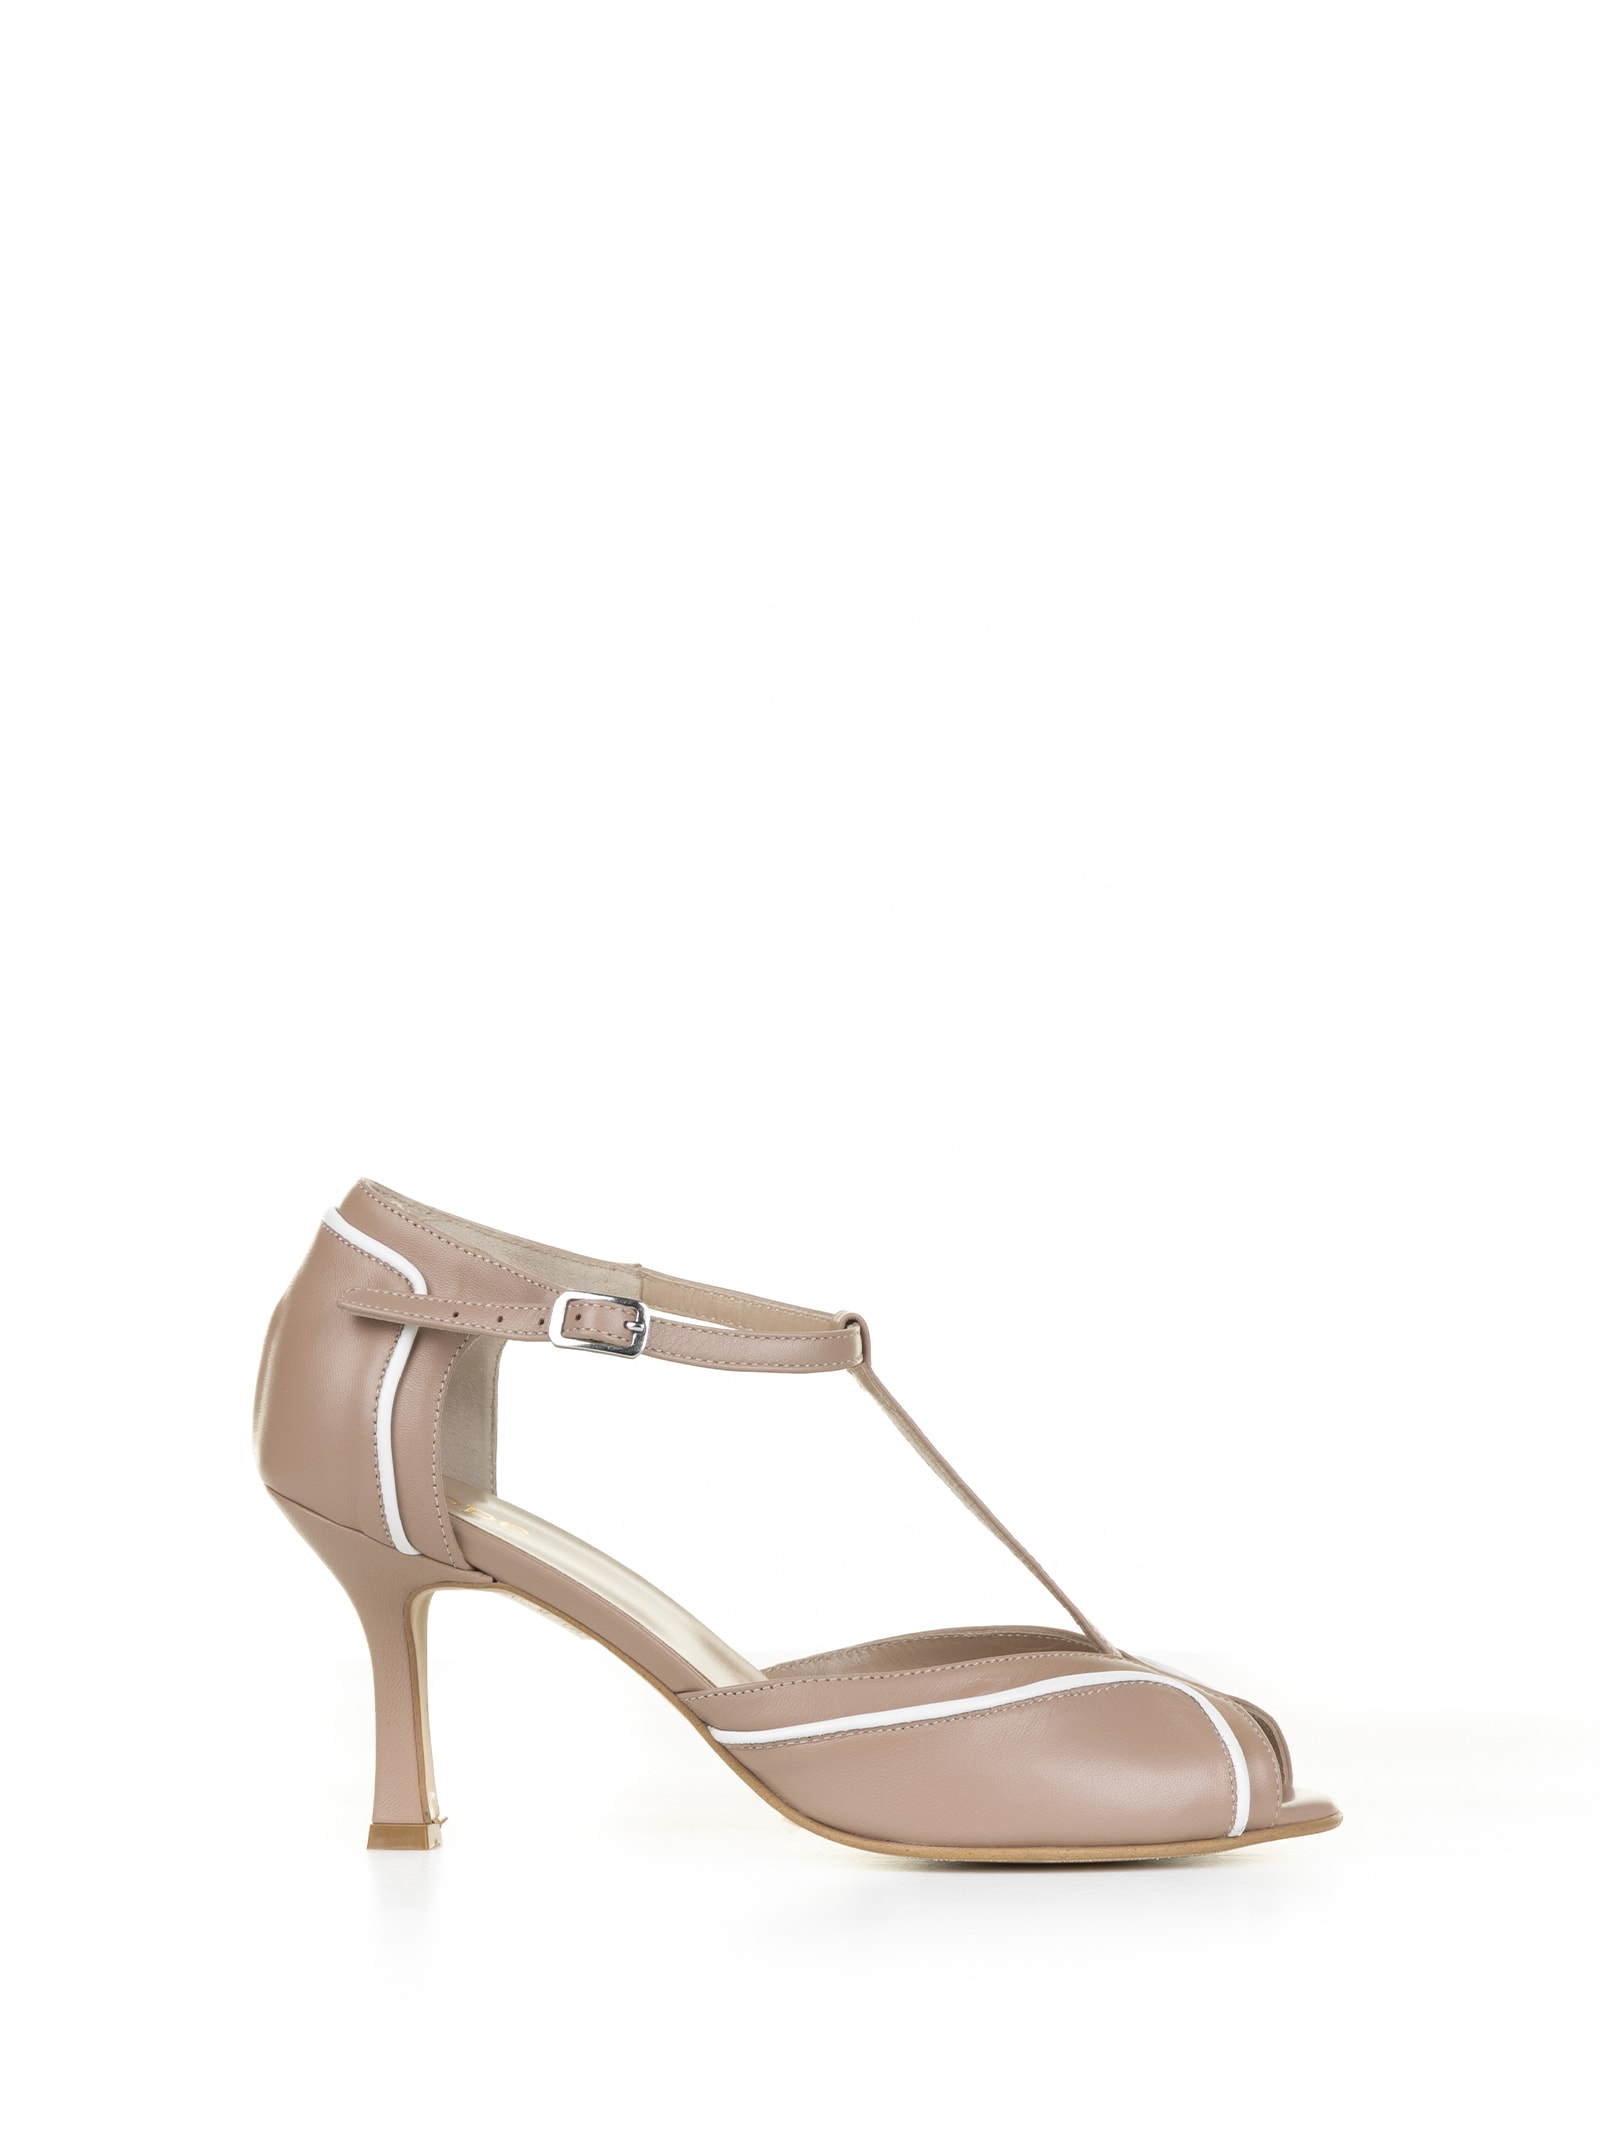 Nude Leather Pumps With Strap